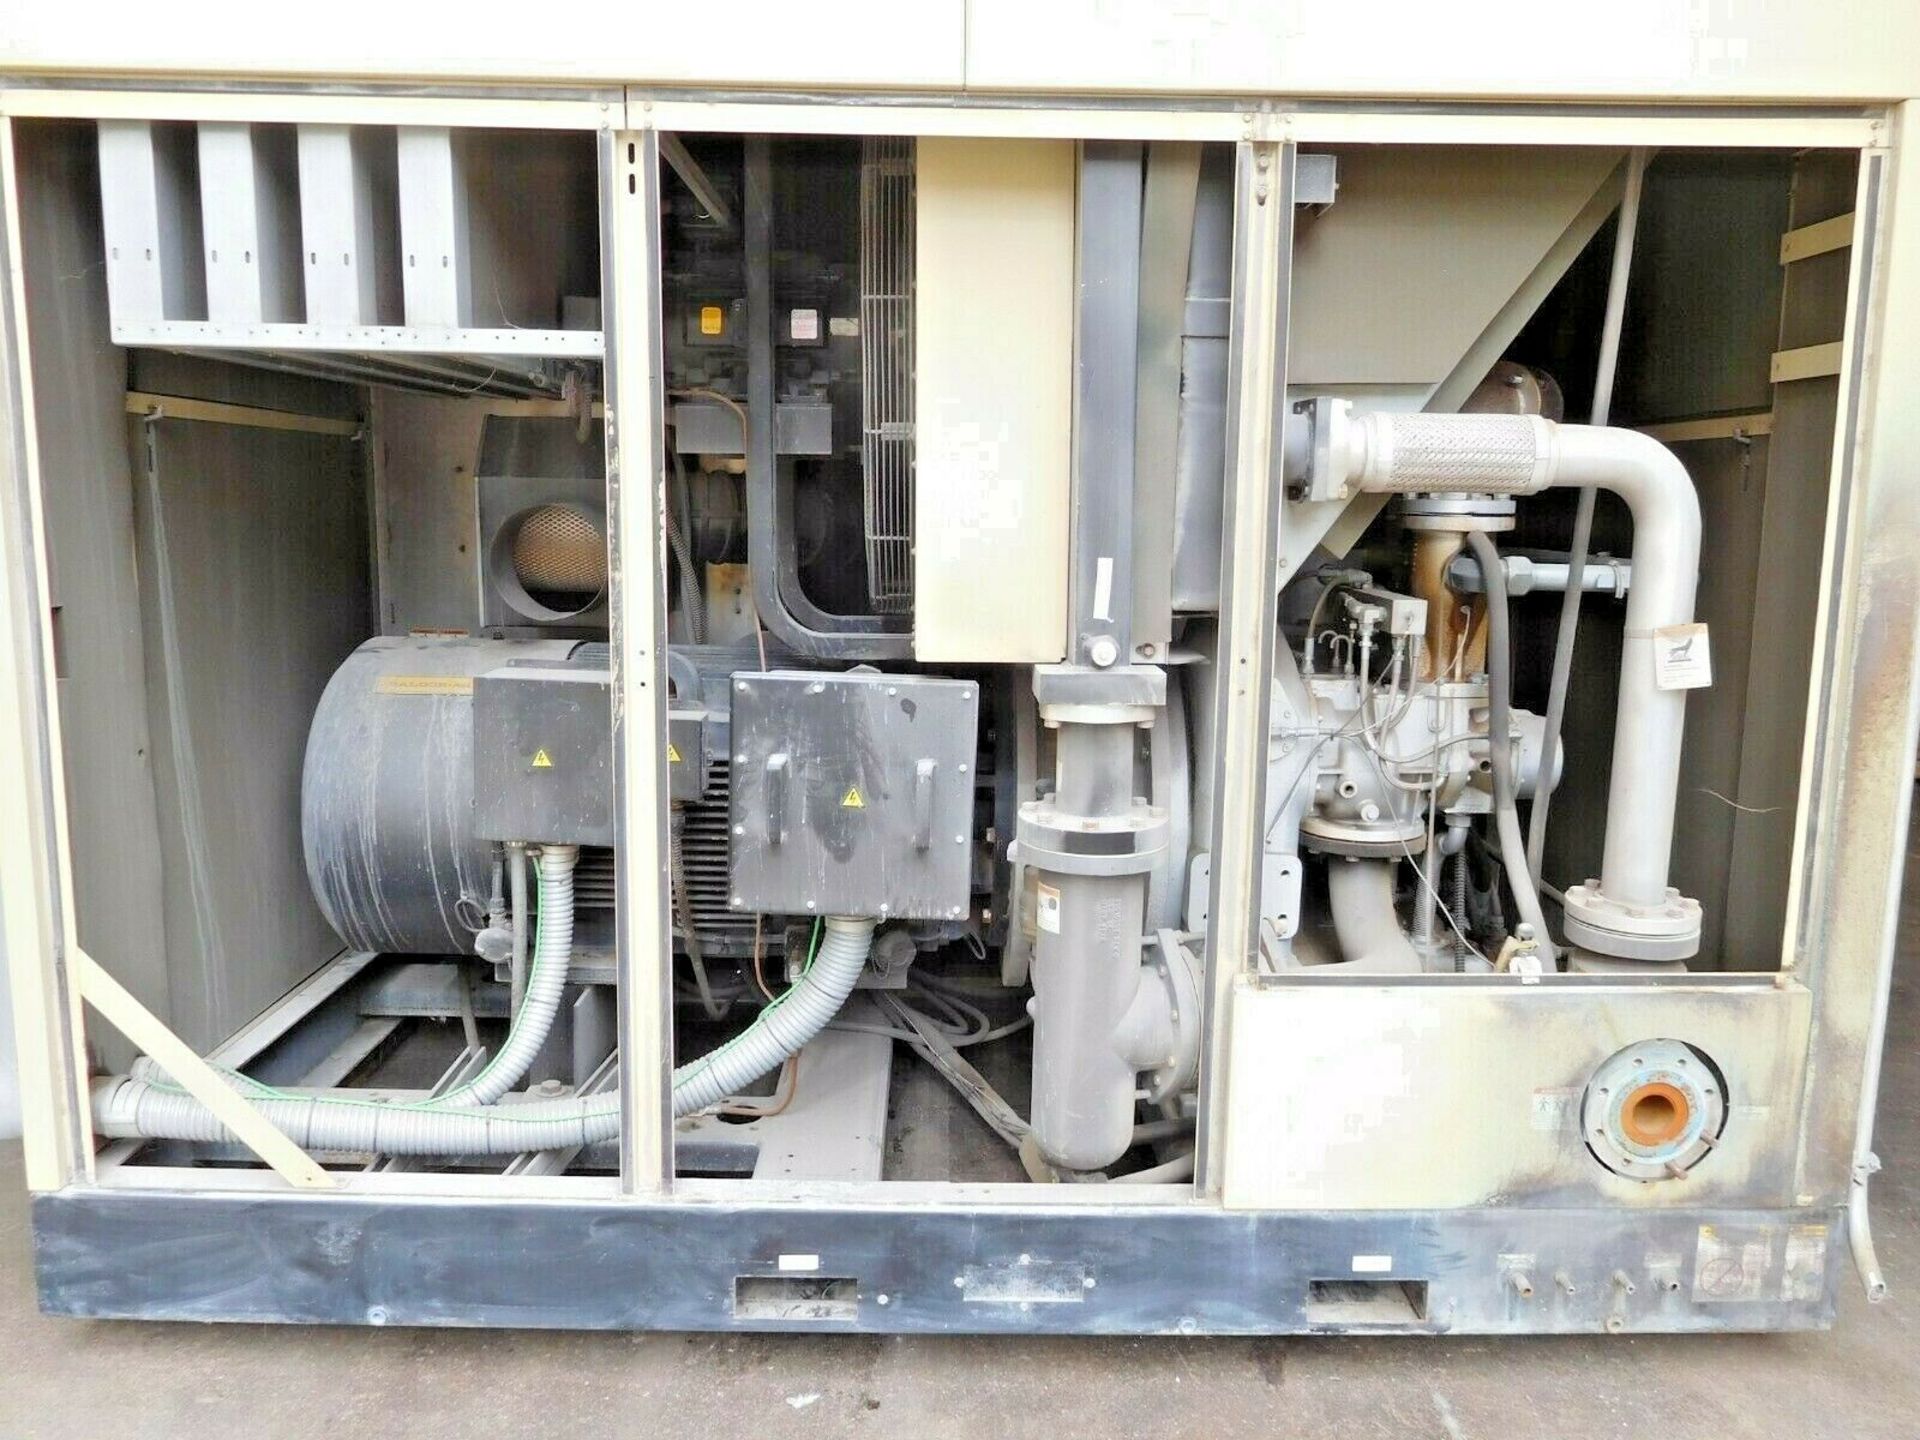 Ingersoll Rand H300 Rotary Screw Air Compressor. 1264 ACFM. 350 HP. - Image 5 of 7